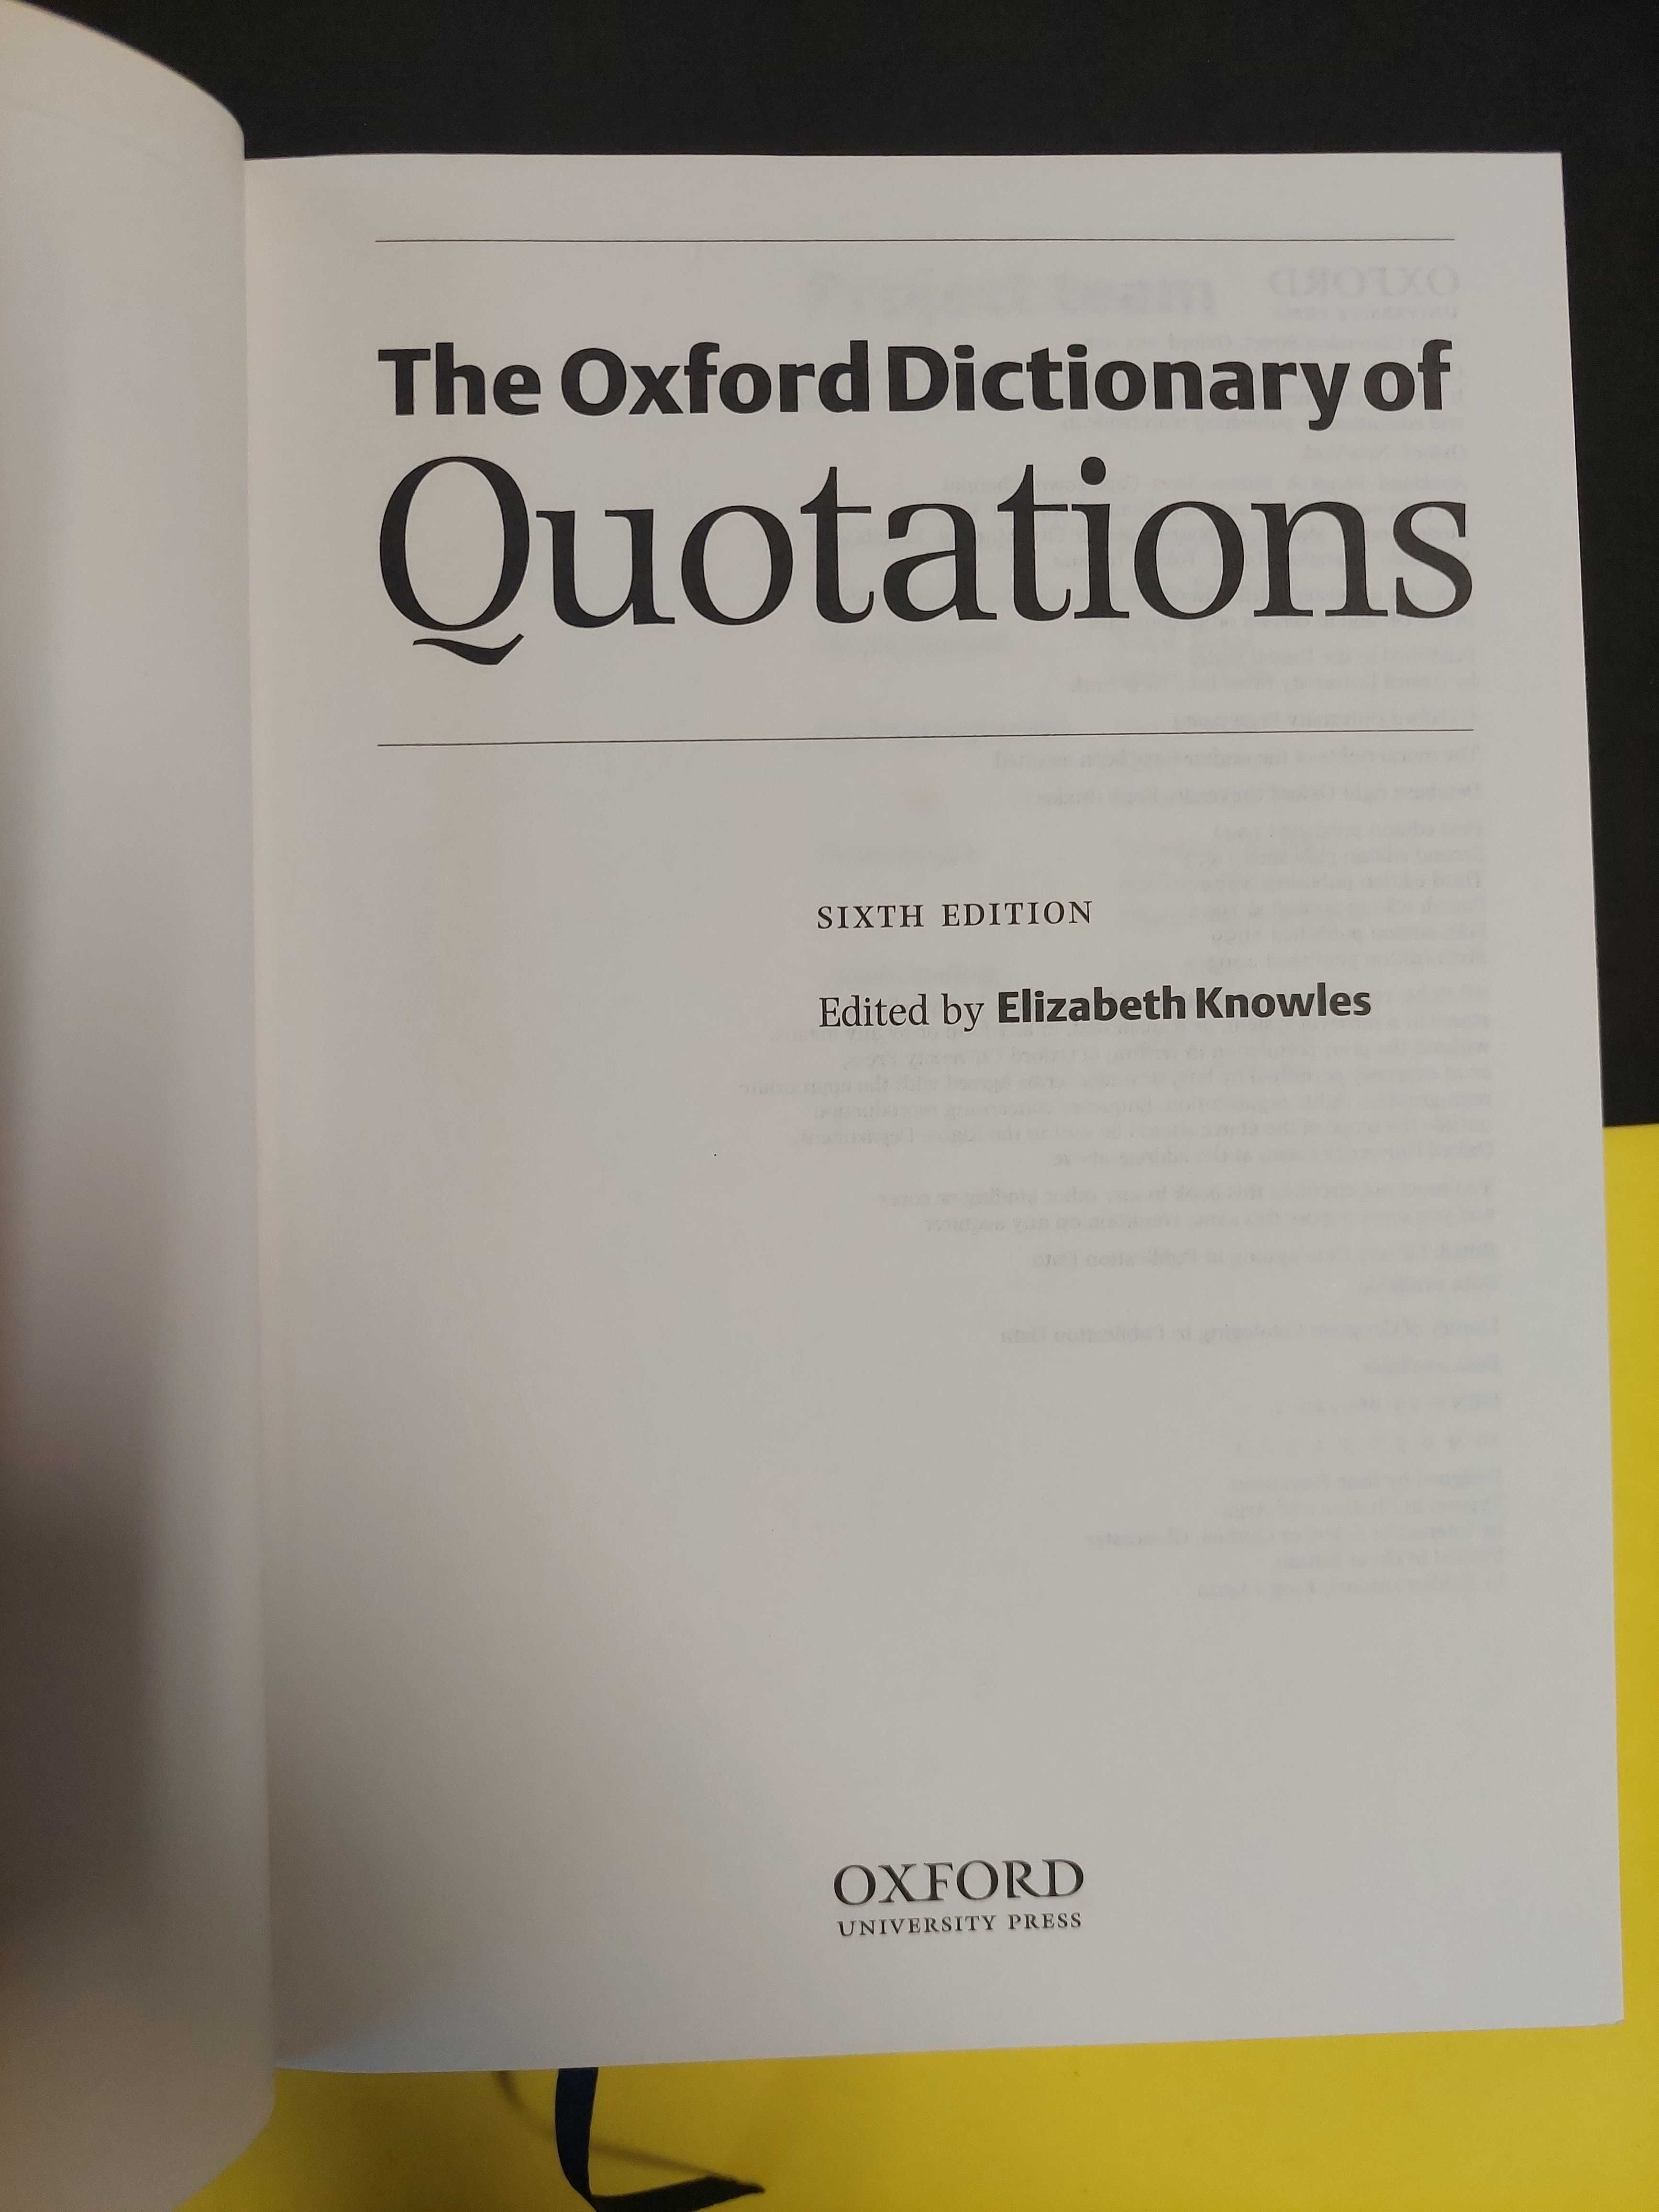 Elizabeth Knowles - Oxford Dictionary of quotations